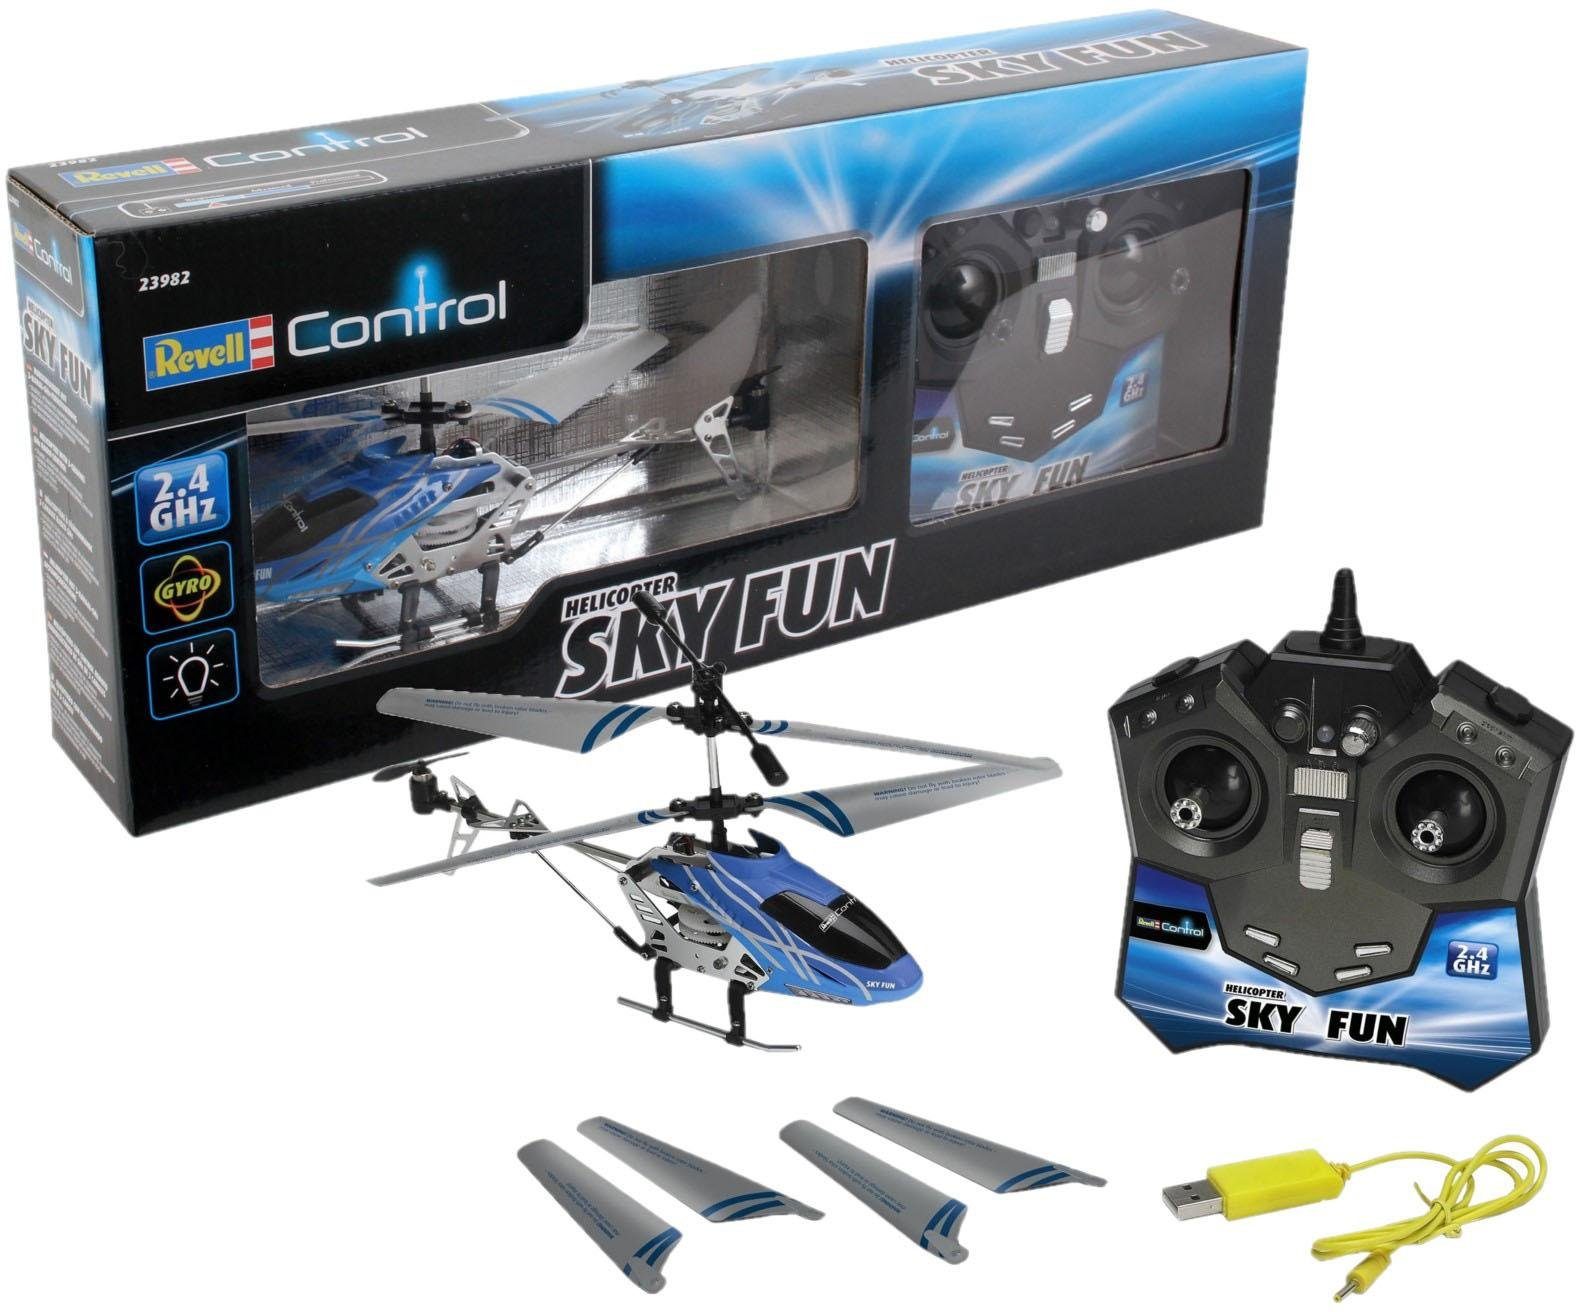 ab 15 Jahre REVELL 23982 RC Helikopter Sky Fun 